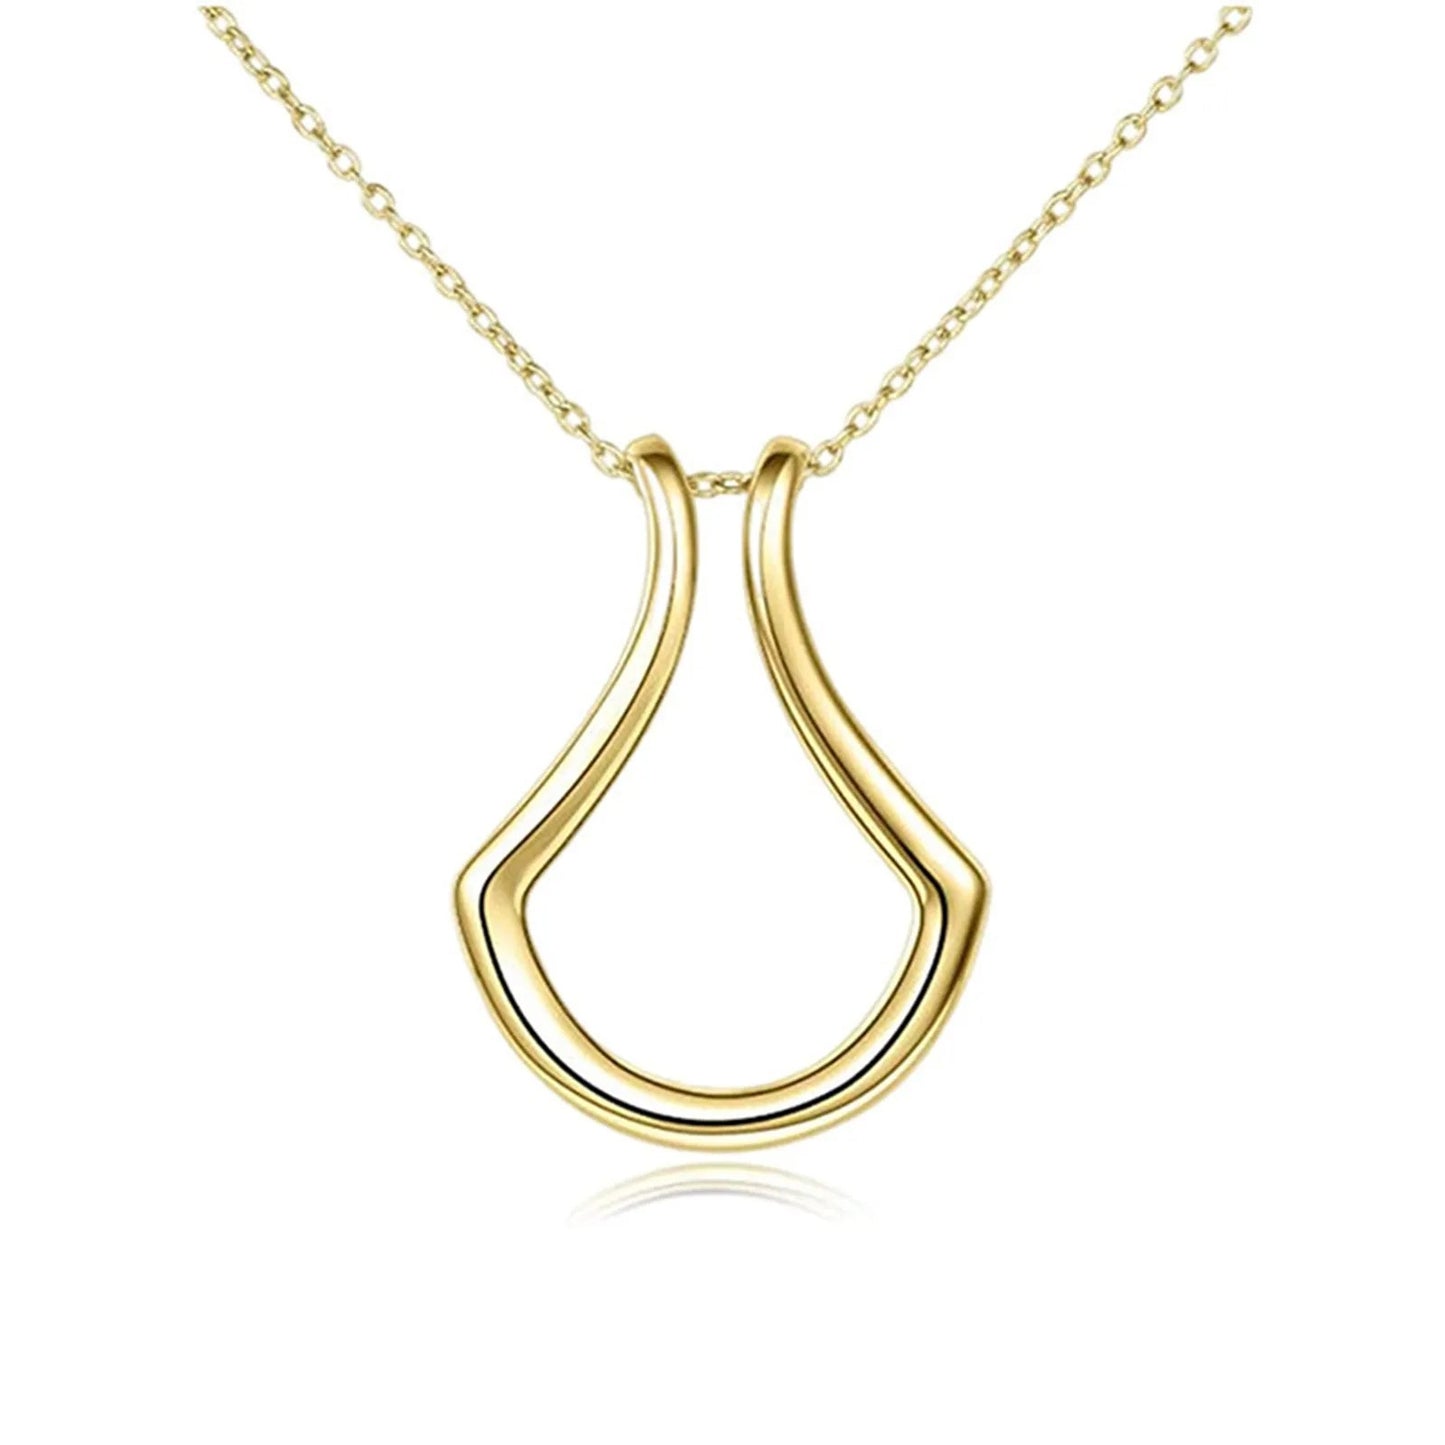 Ring Keeper Necklace